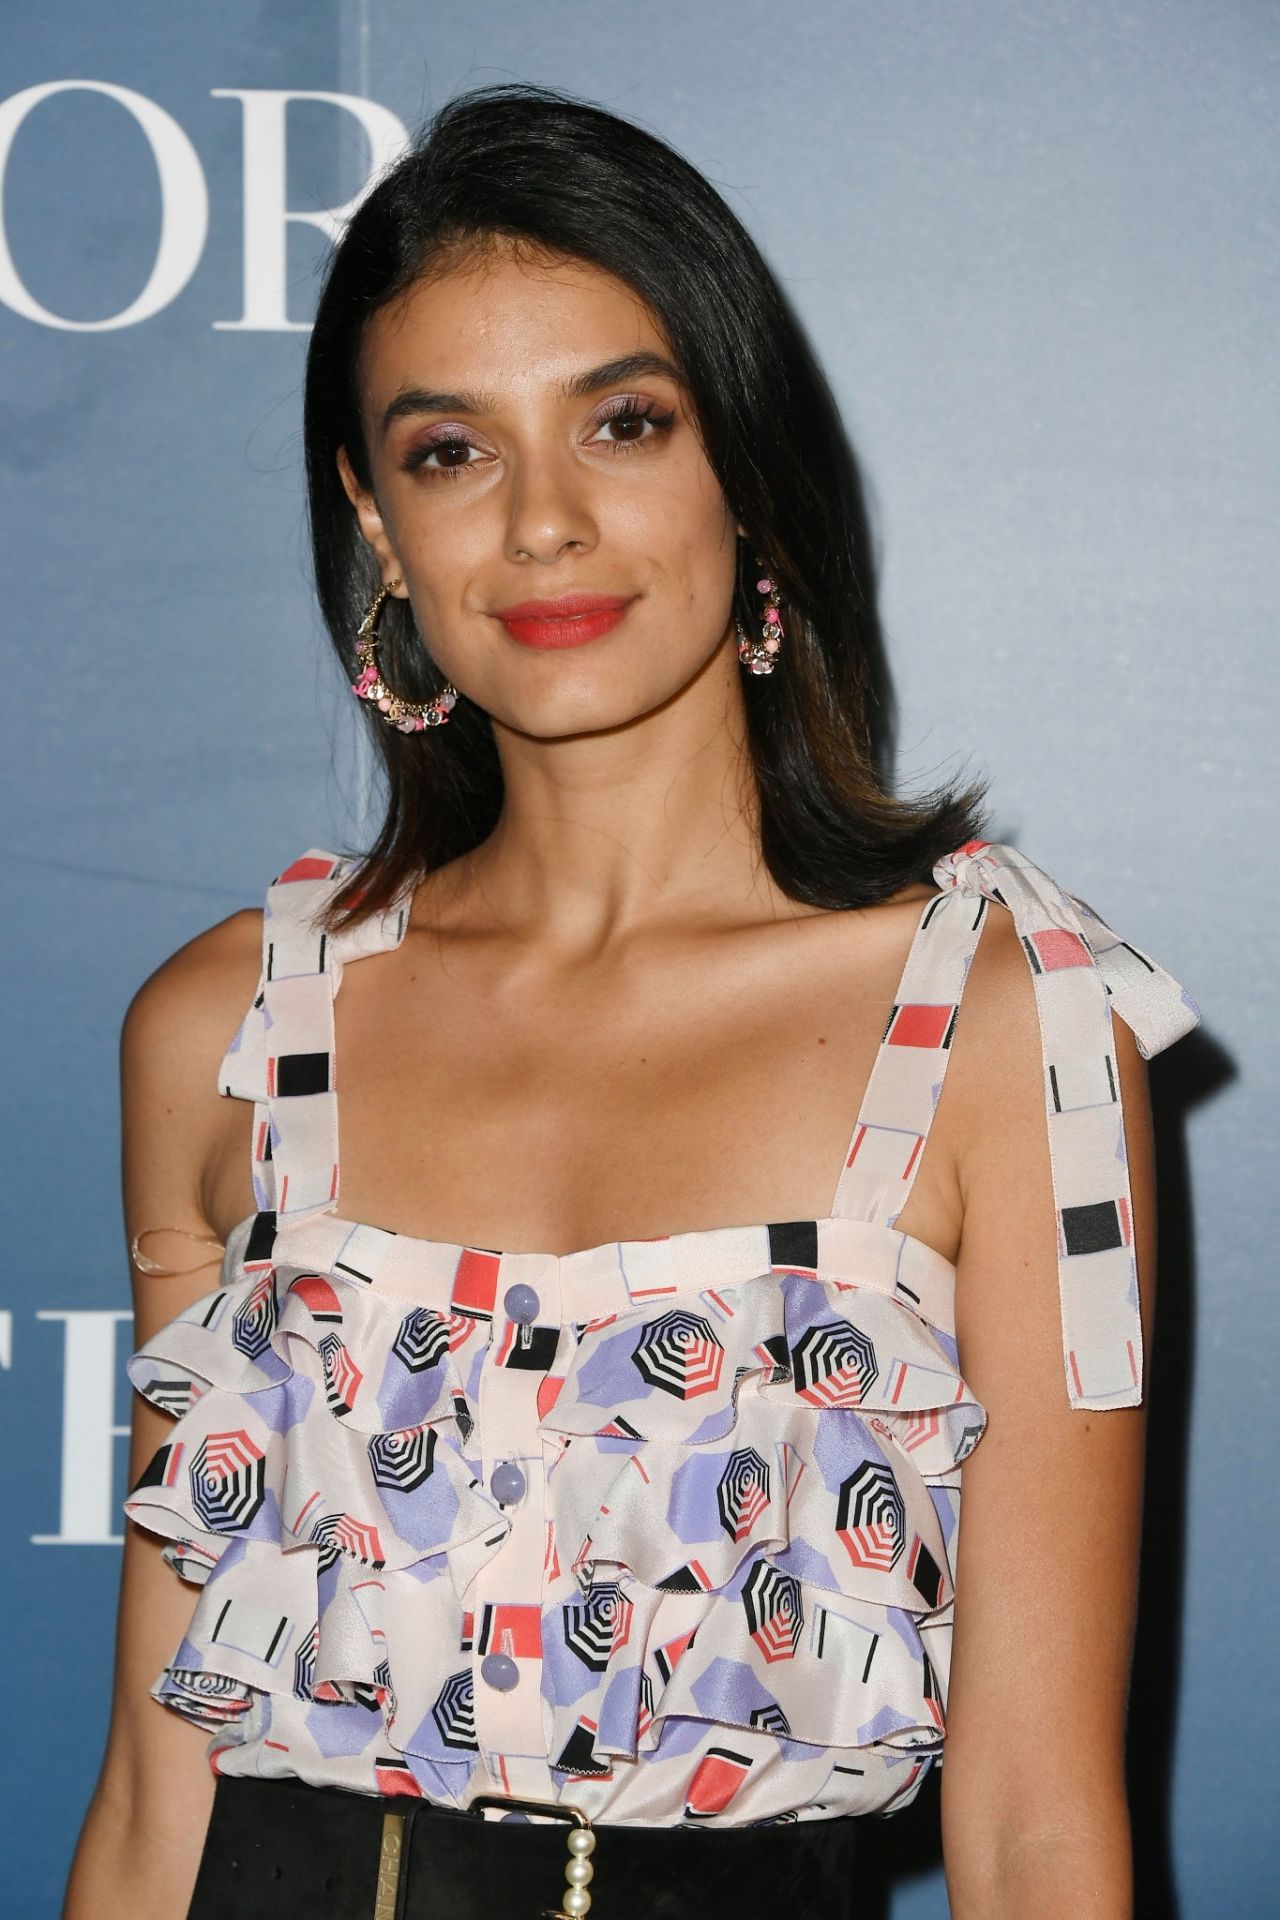 laysla-de-oliveira-the-hfpa-and-thr-party-in-toronto-09-07-2019-3.jpg